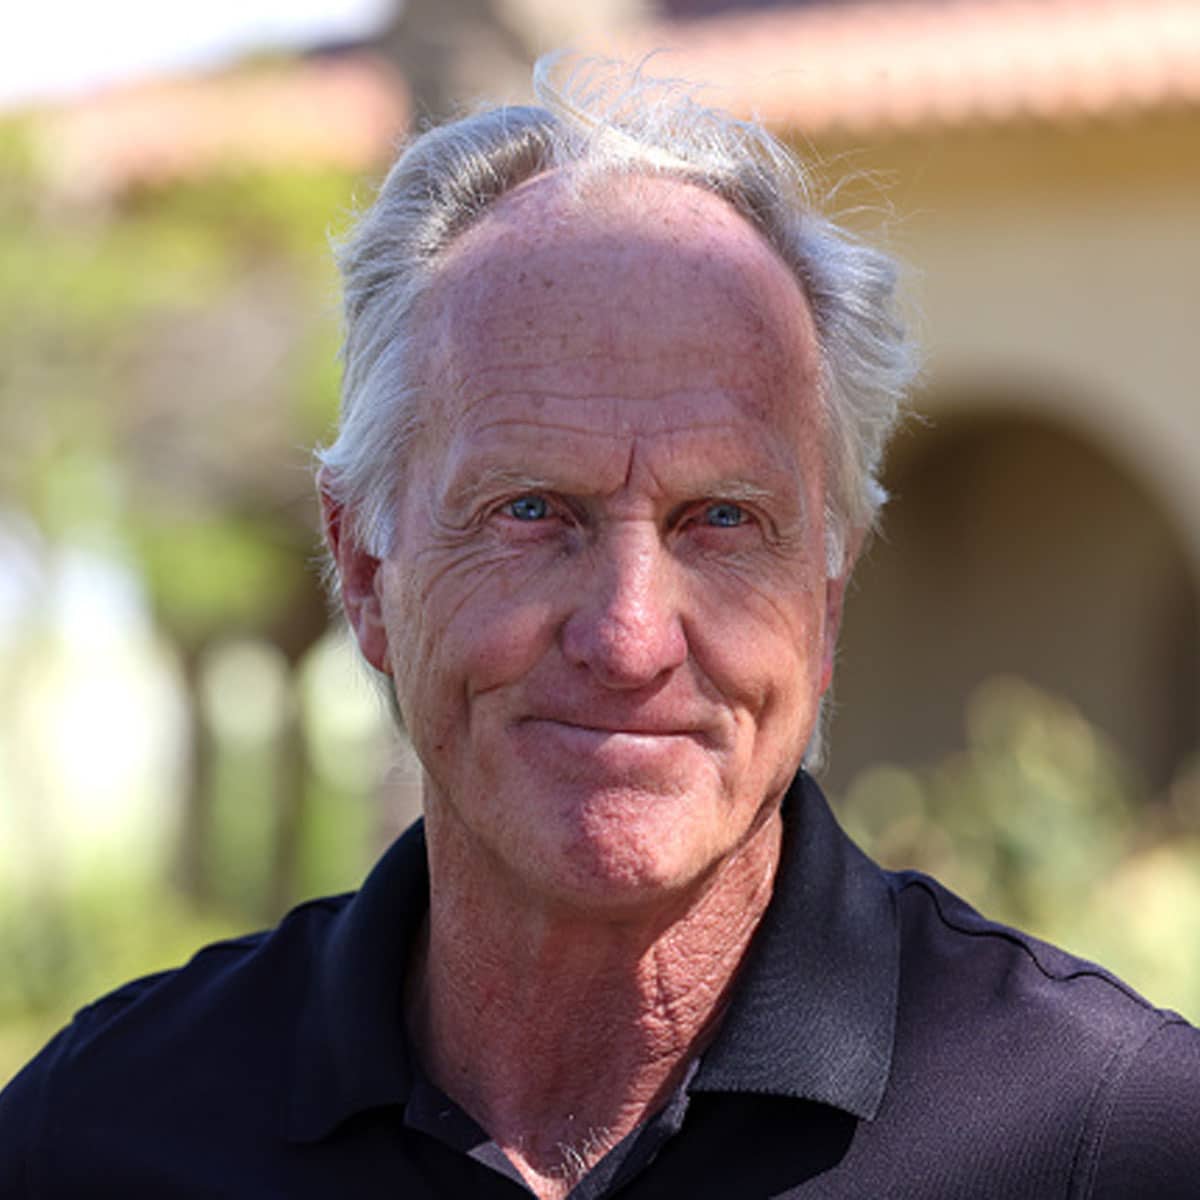 Greg Norman, CEO of Liv Golf Investments talks to the media during a practice round prior to the PIF Saudi International at Royal Greens Golf & Country Club